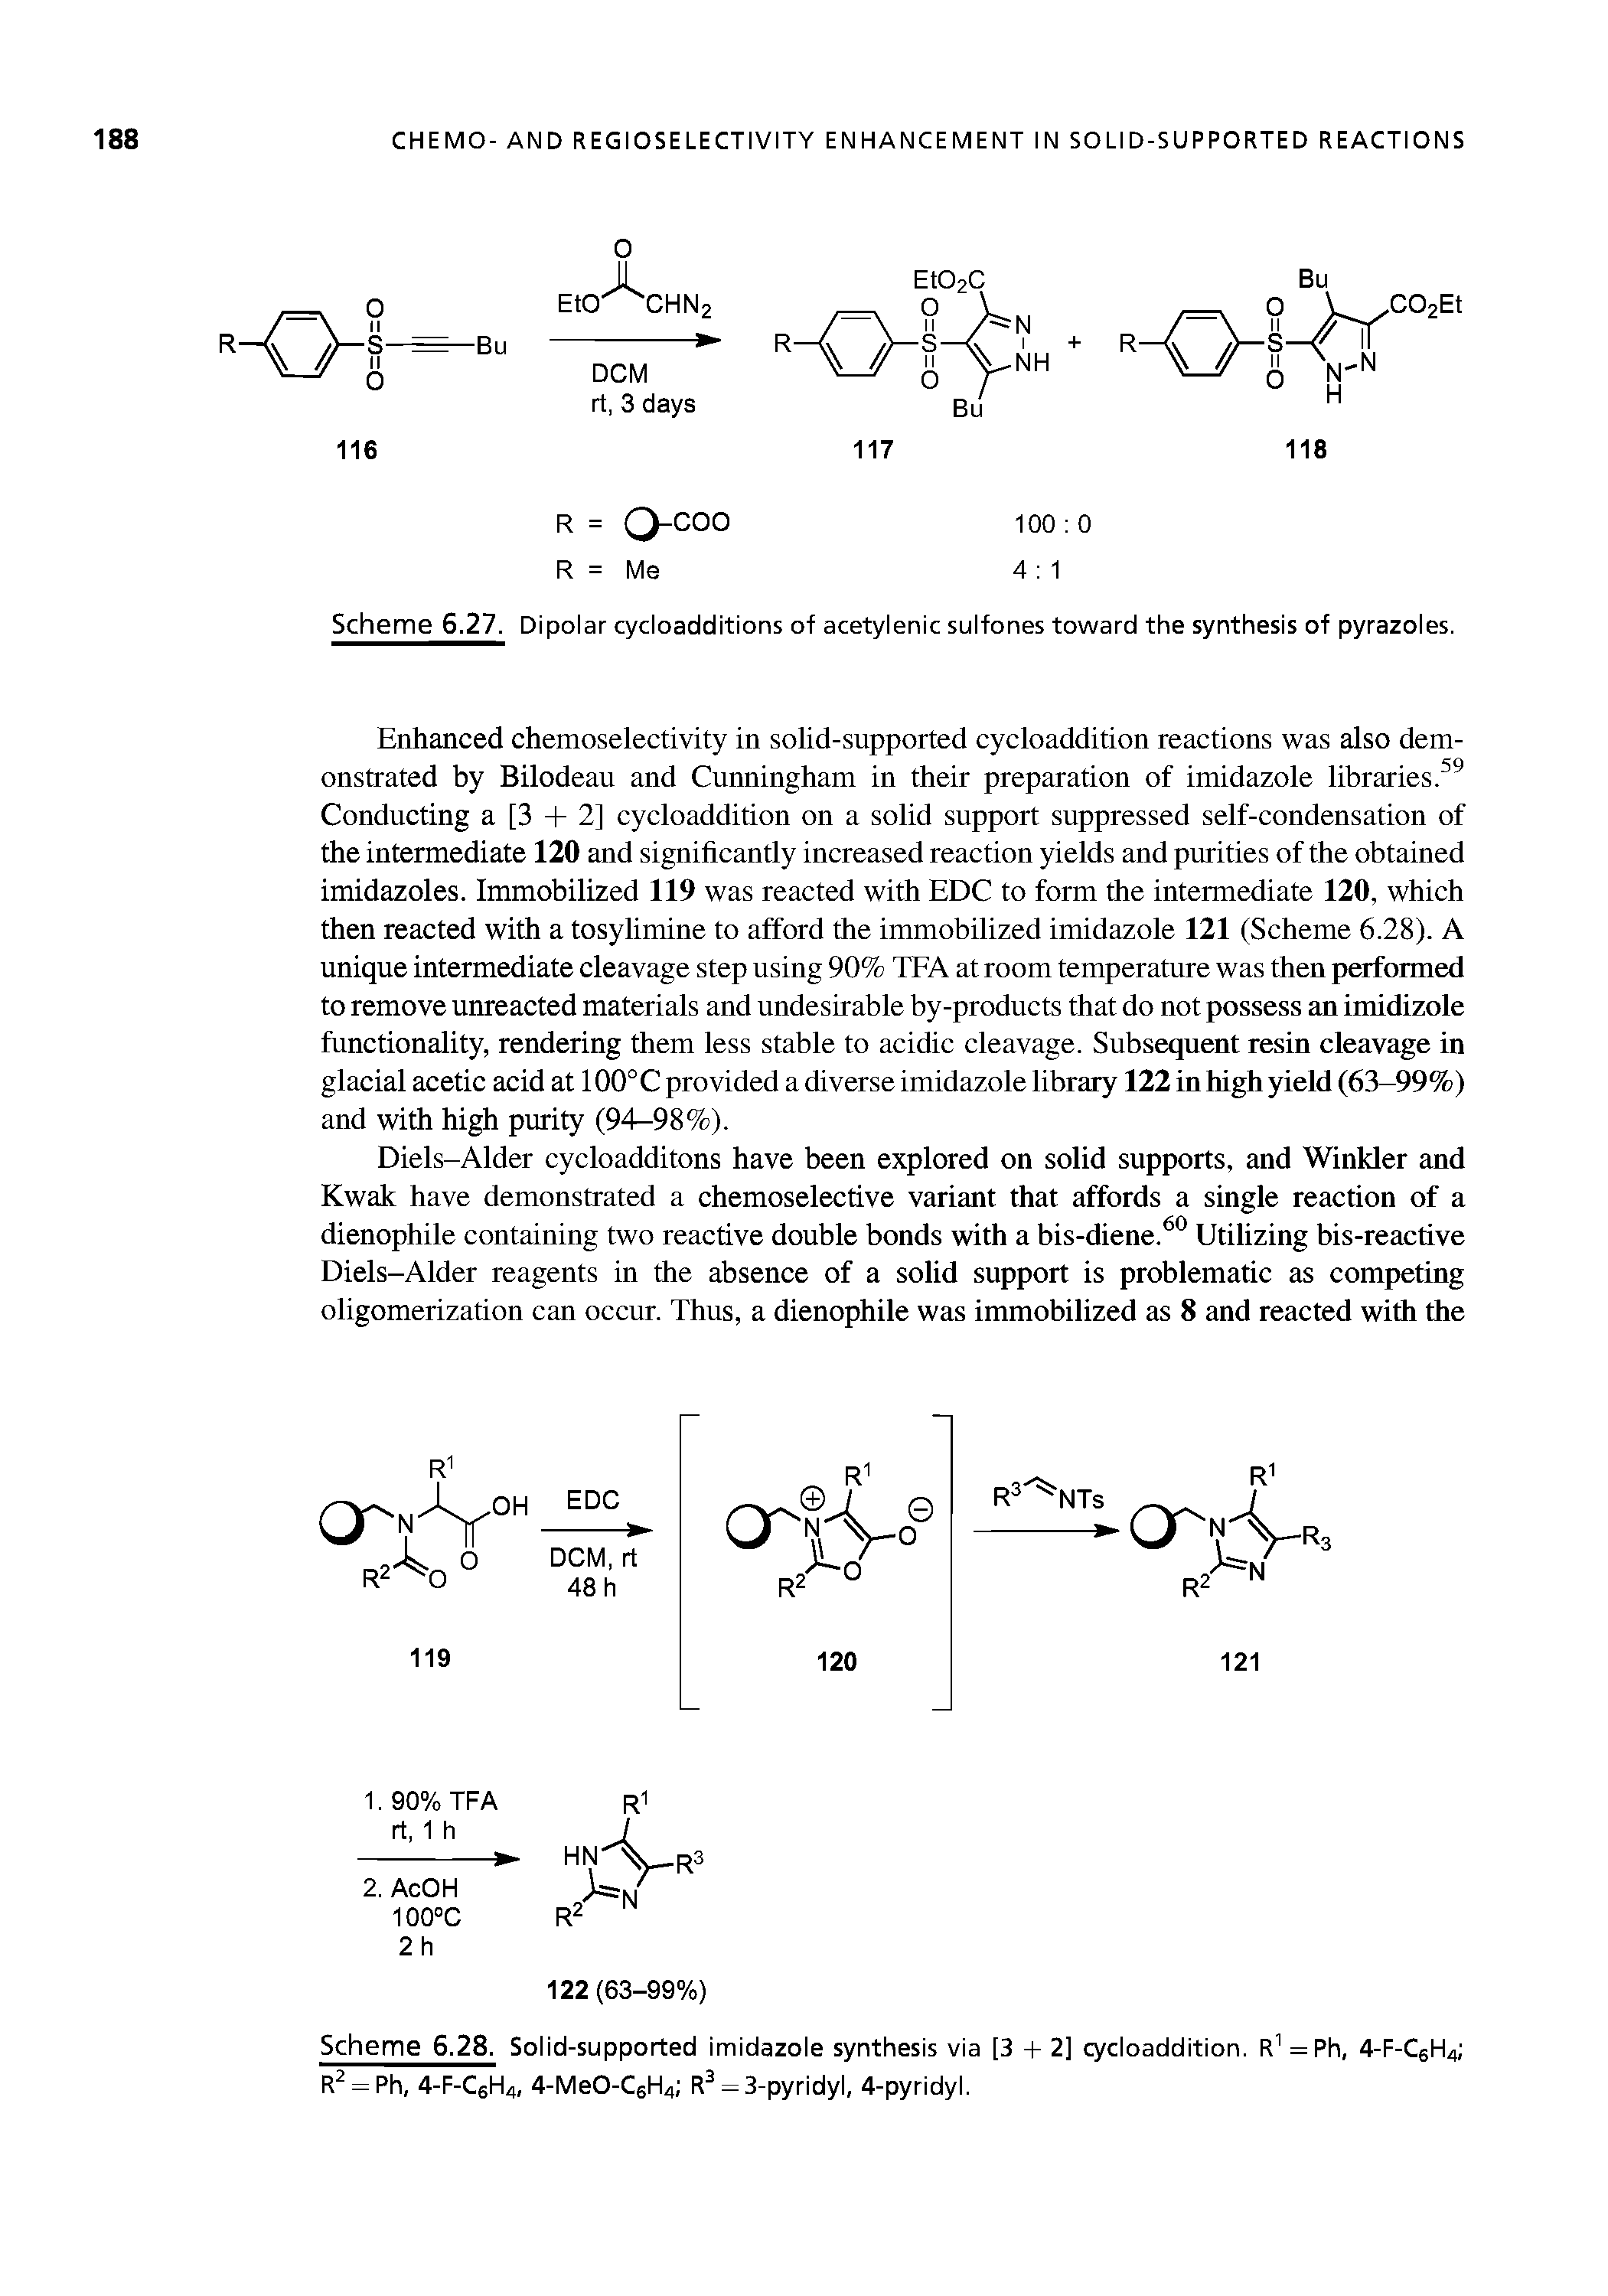 Scheme 6.27. Dipolar cycloadditions of acetylenic sulfones toward the synthesis of pyrazoles.